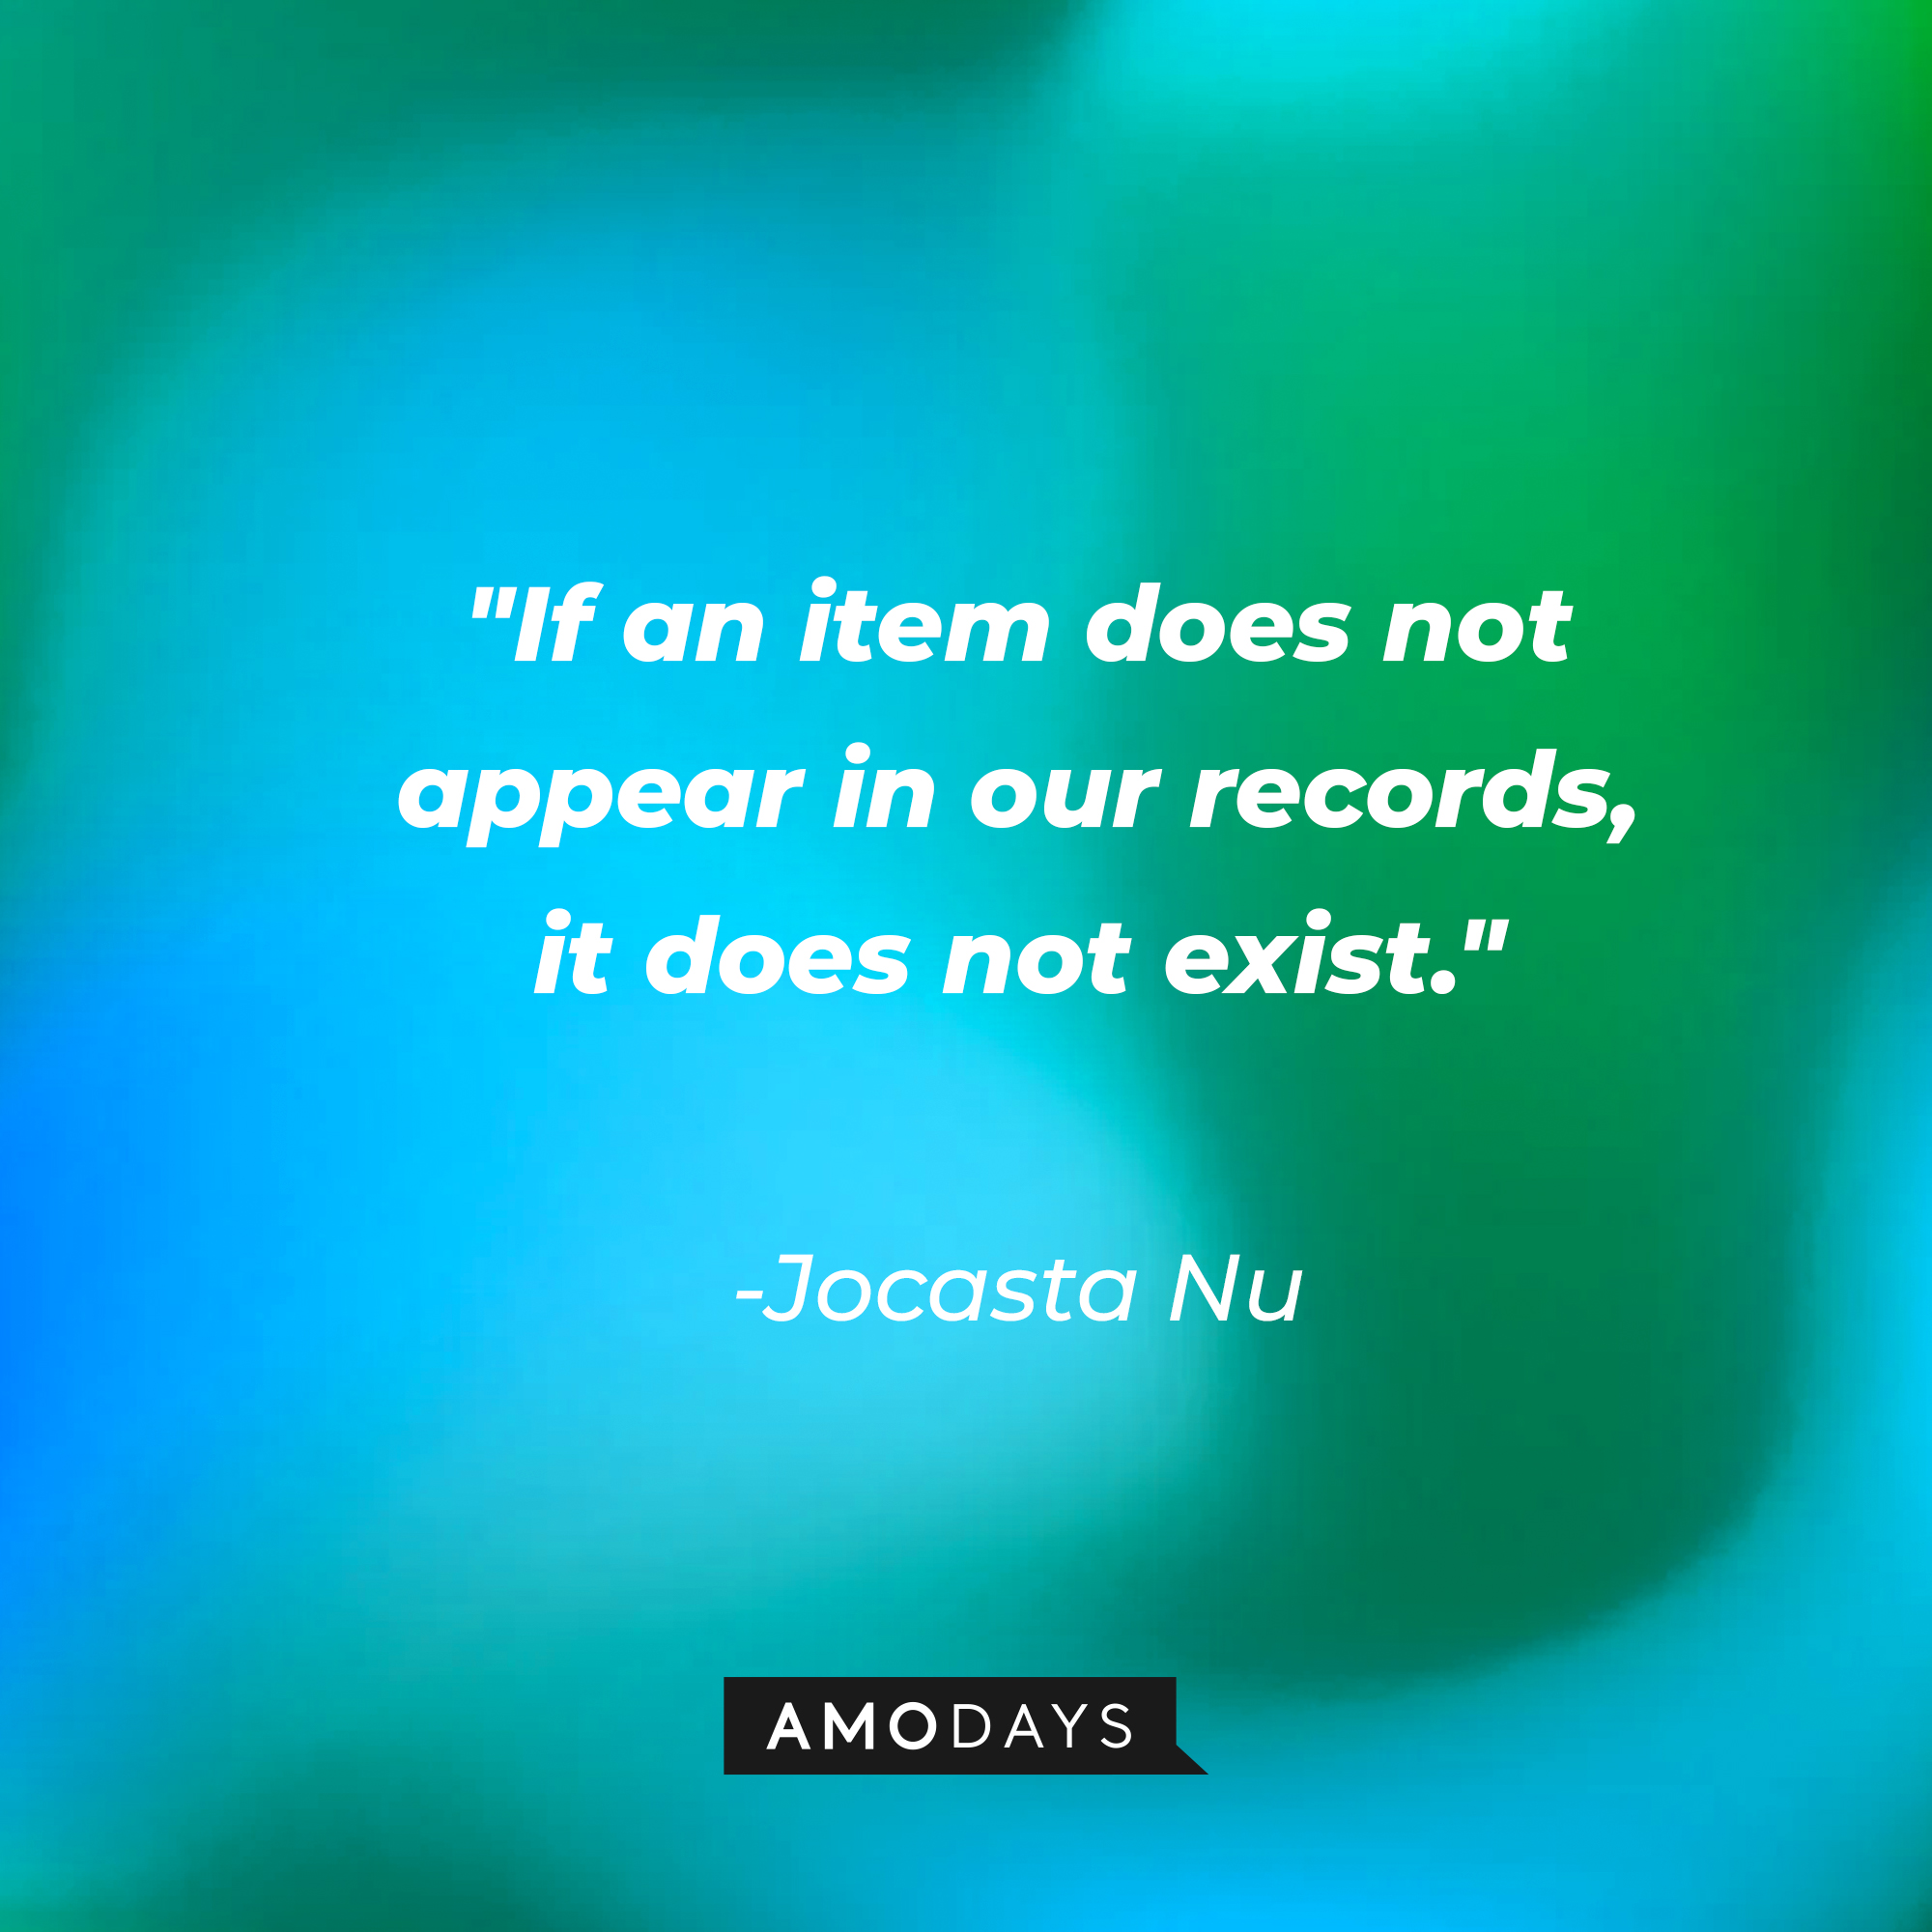 Jocasta Nu's quote: "If an item does not appear in our records, it does not exist." | Source: AmoDays